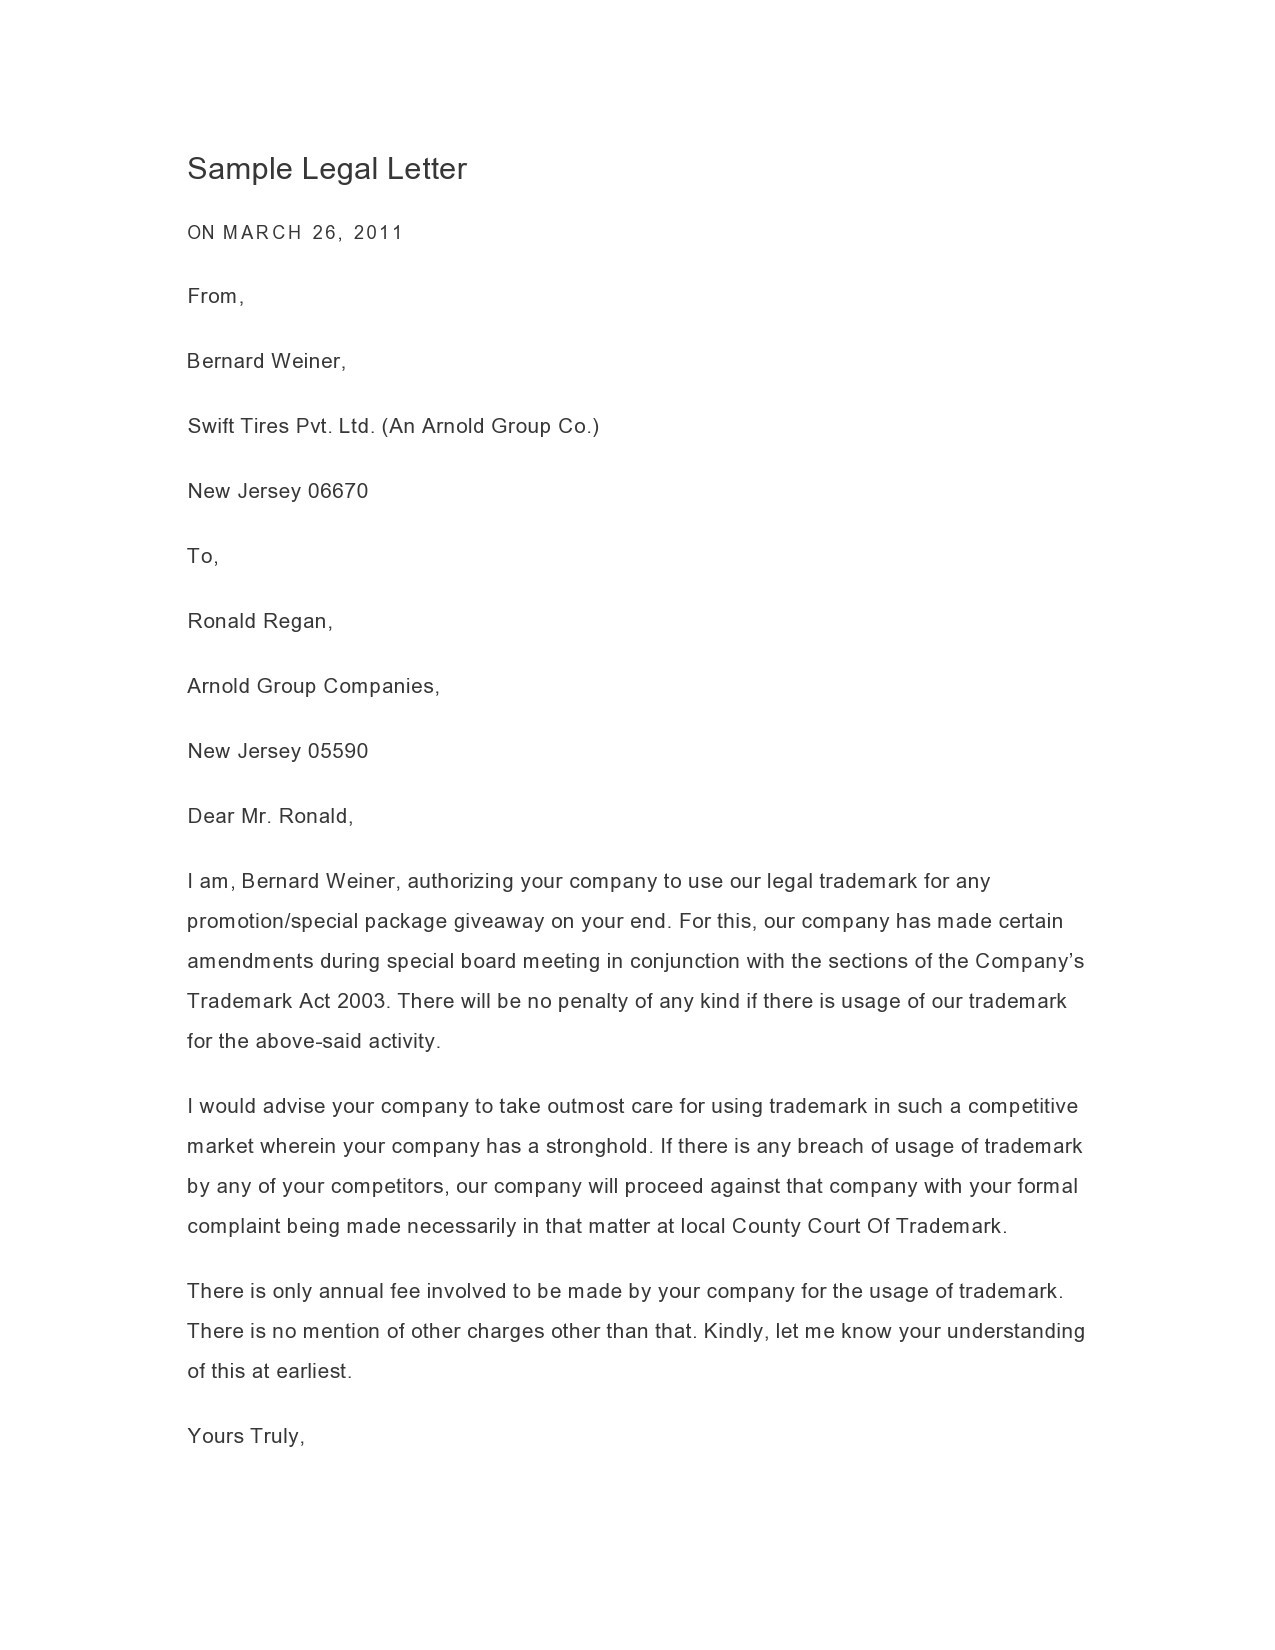 Legal Letter Format Template from templatelab.com